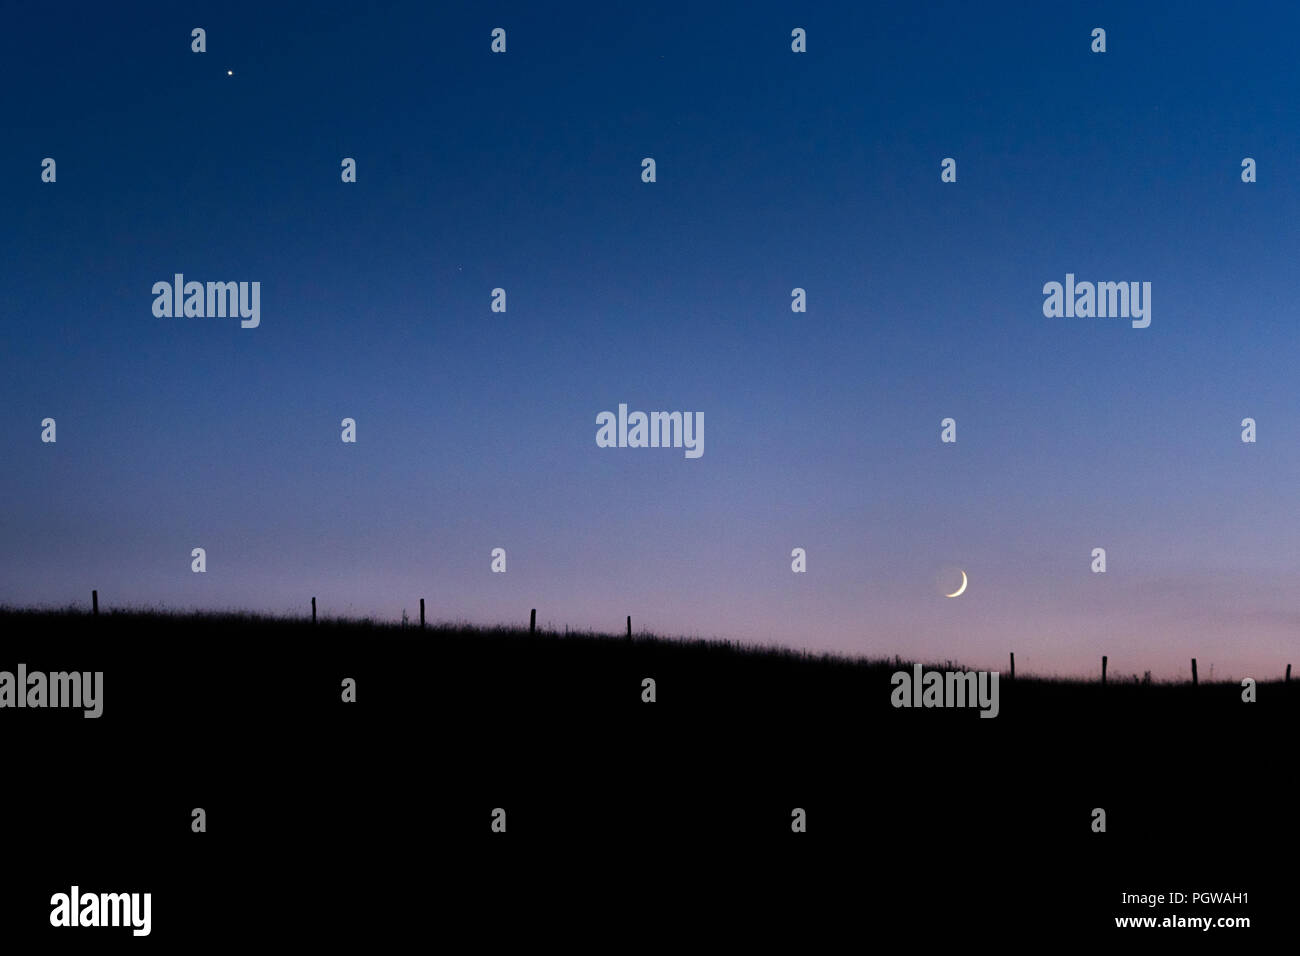 The skyline cradles the crescent moon in the pale glow of the pastel twilight below Venus, an old fence line is visible along the gentle rolling hills. Stock Photo